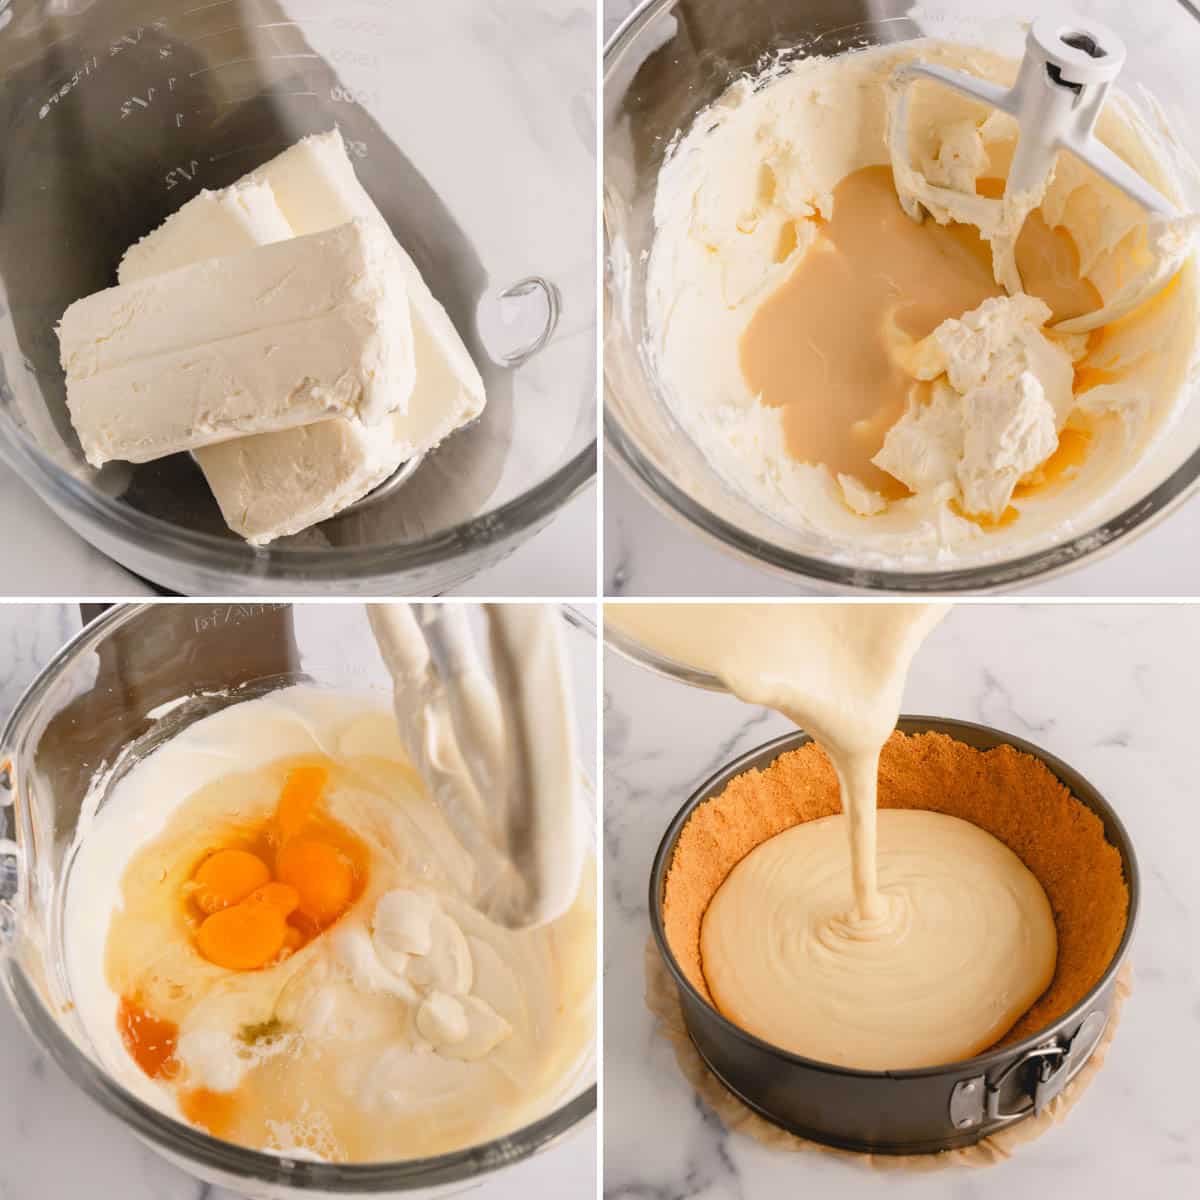 The process of making cheesecake filling and pouring it into a graham cracker crust.